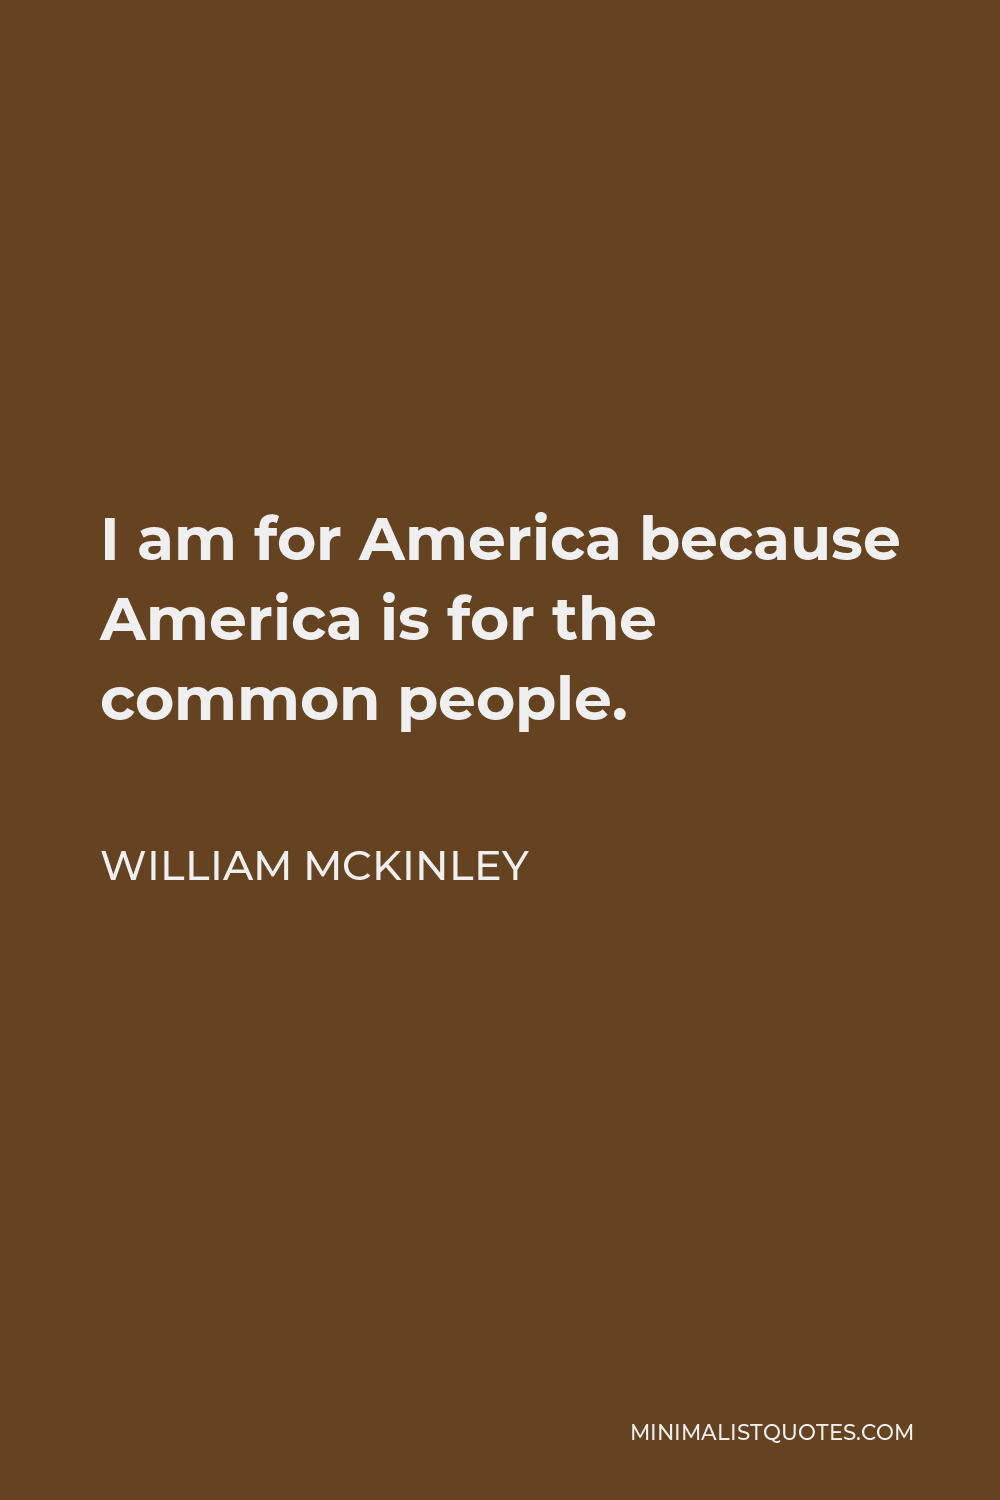 William McKinley Quote - I am for America because America is for the common people.